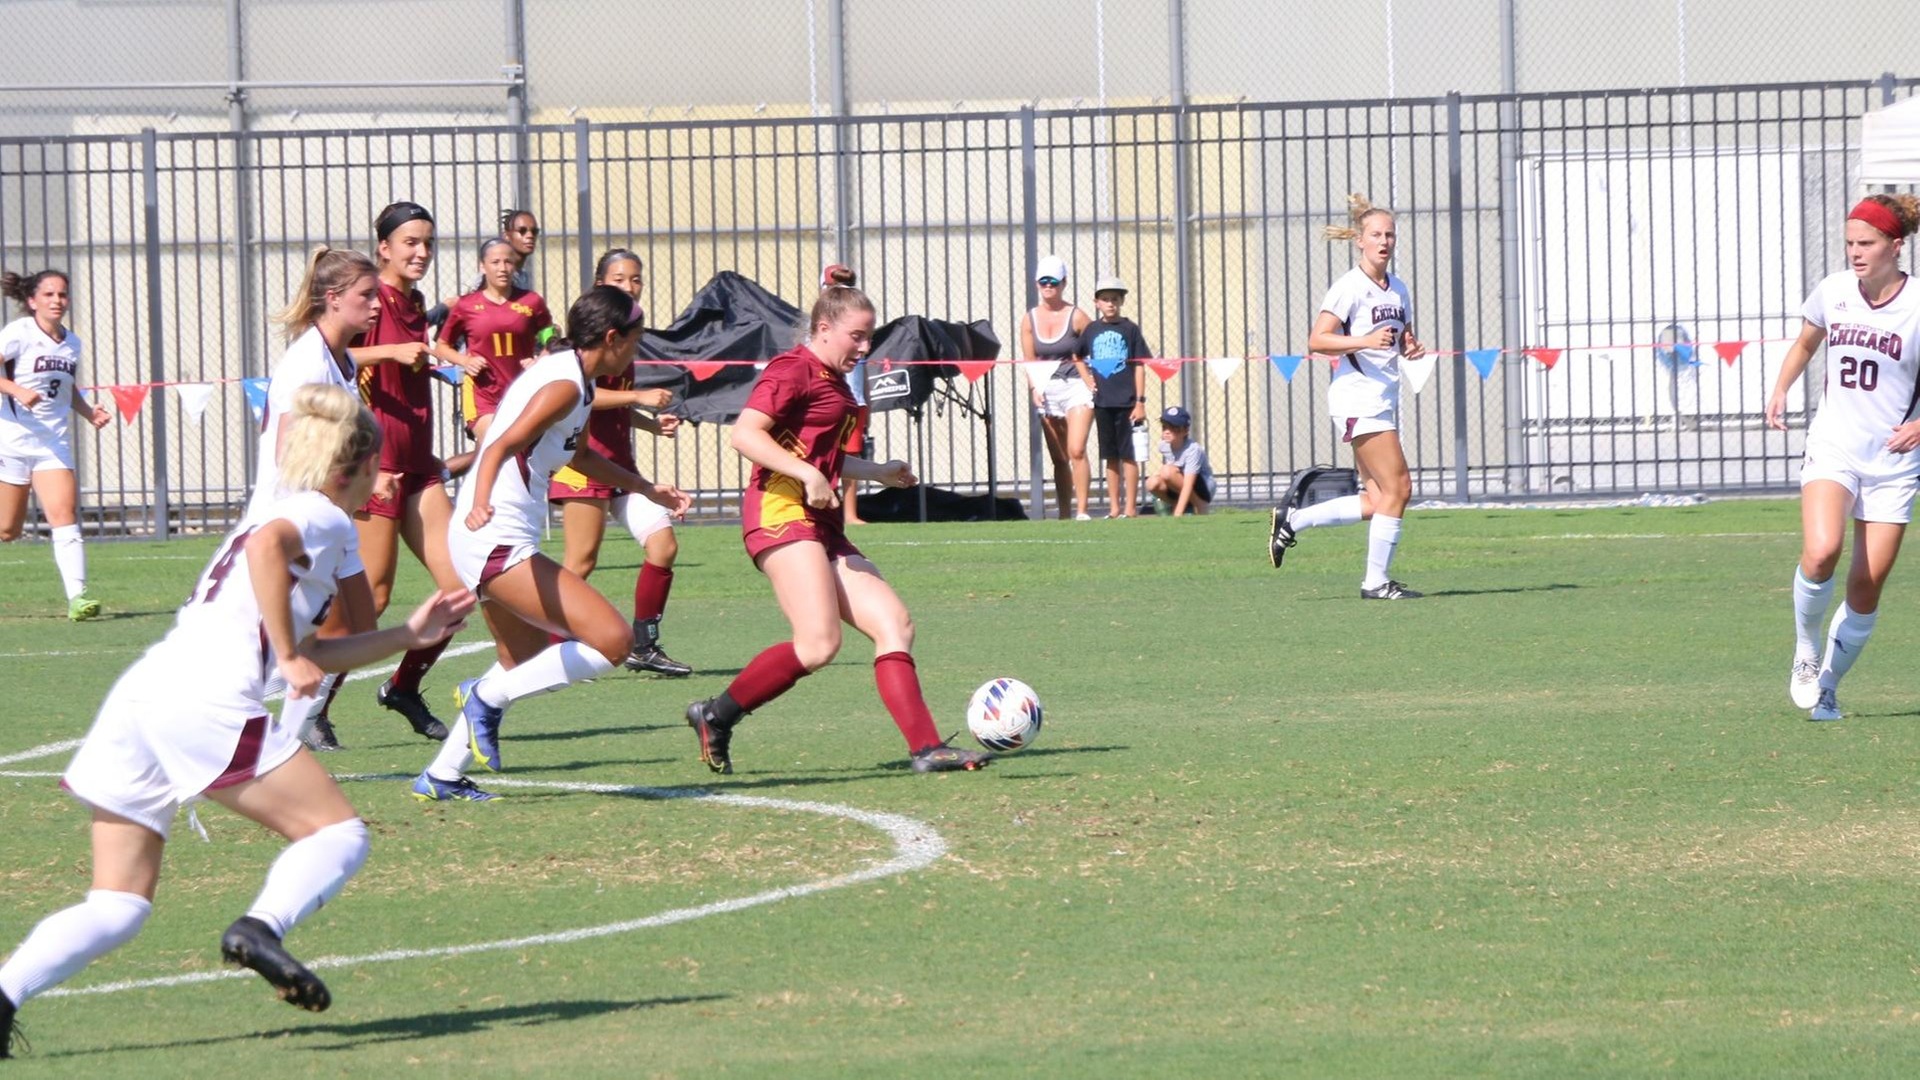 Kaitlyn Helfrich scored twice in the first 20 minutes (photo by Julian Rivera-Williams)